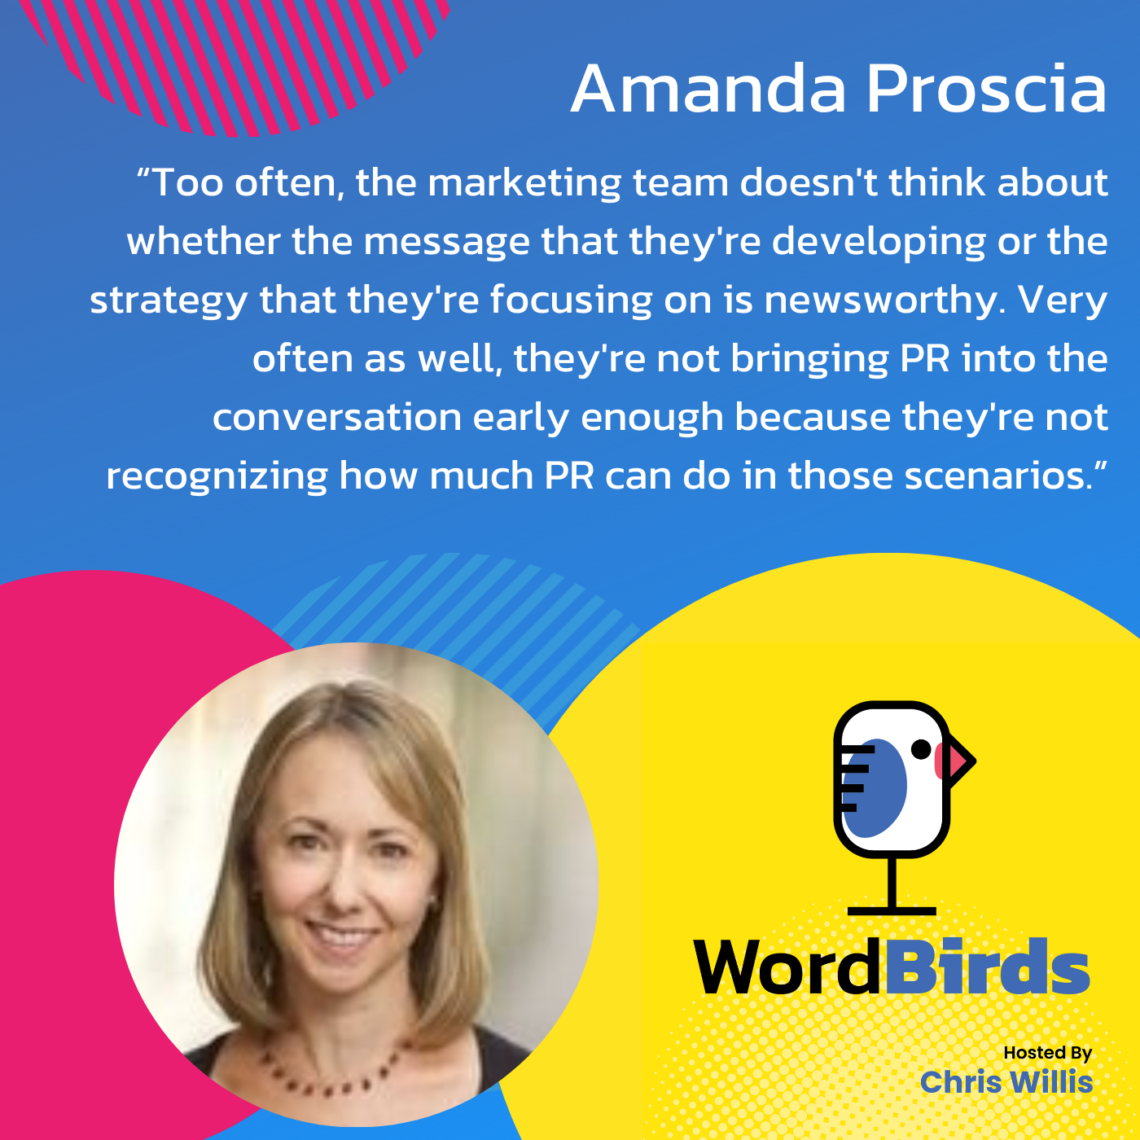 On a blue background there's a quote from Amanda Proscia in white that takes up the majority of the image. The bottom of the image has a headshot image of Amanda and the WordBirds Podcast logo.